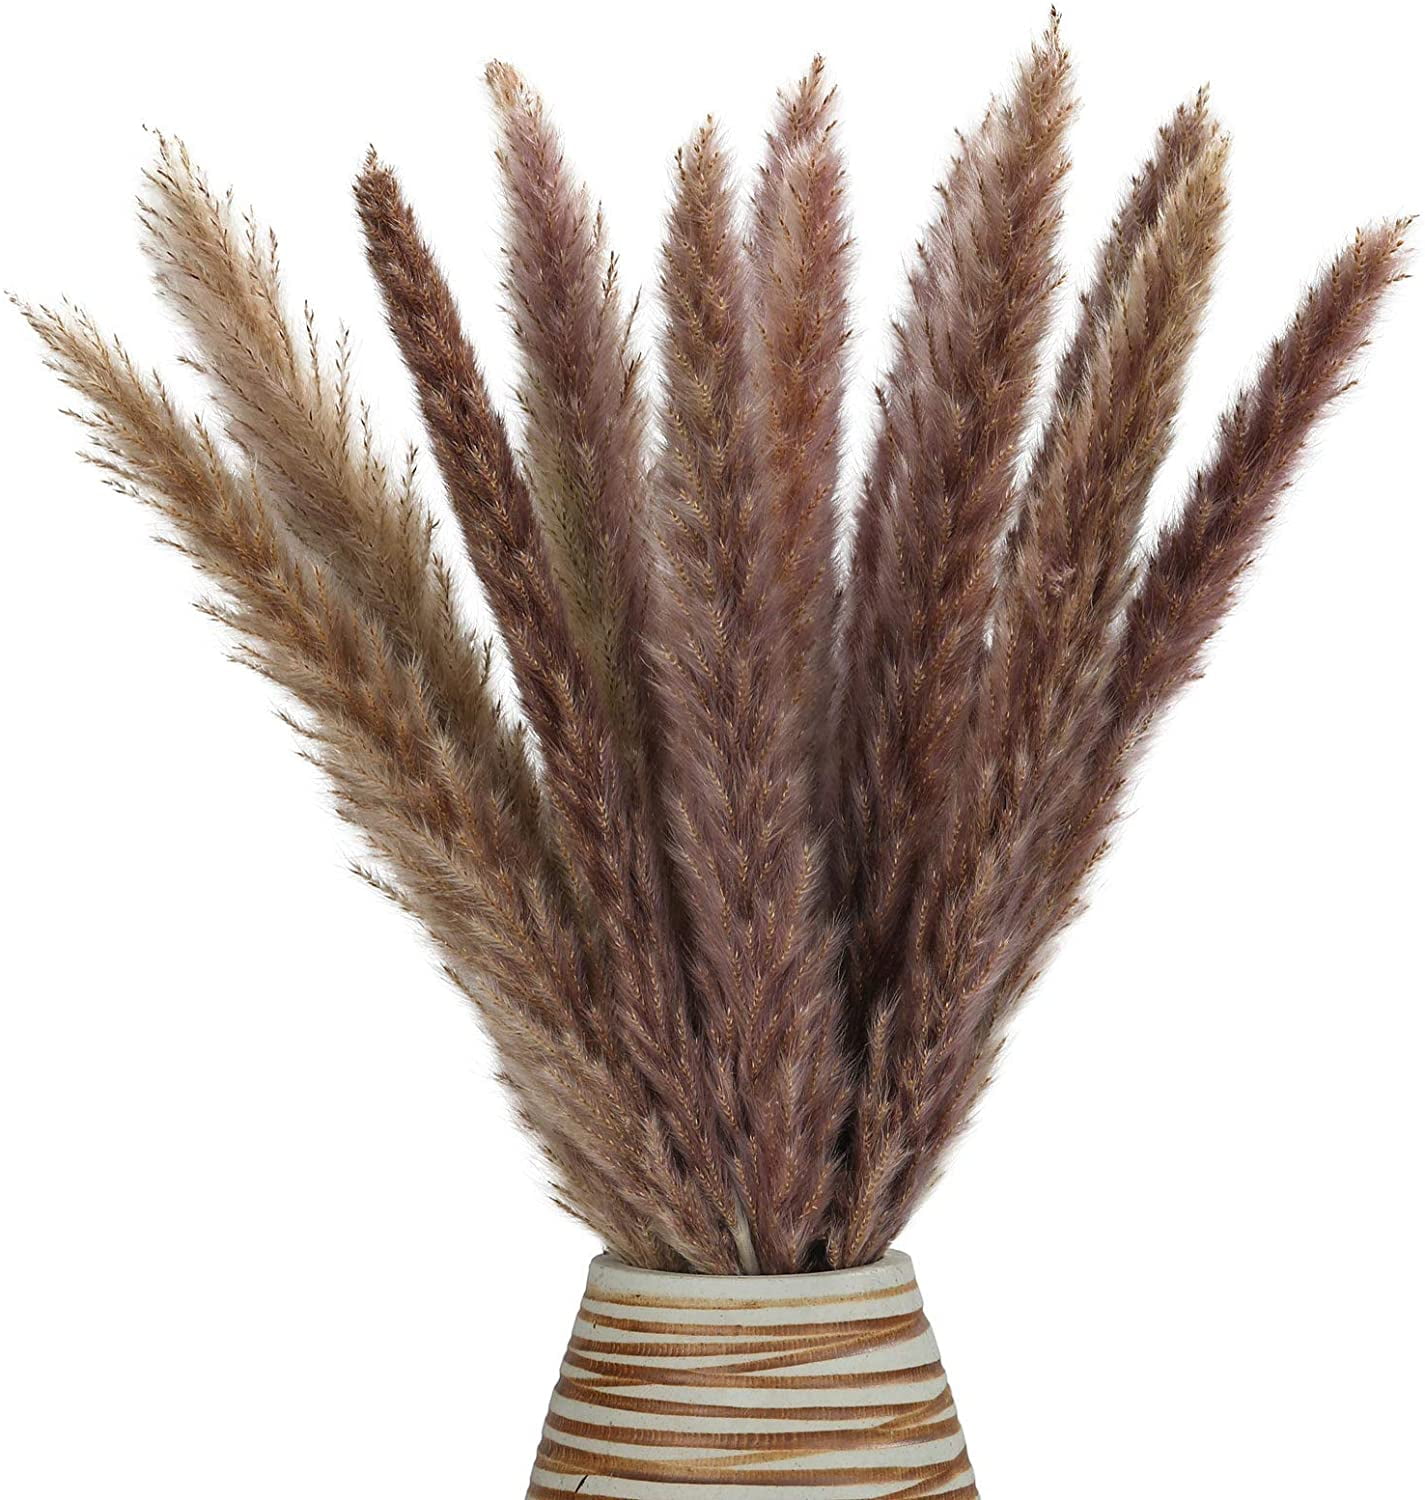 10 Pcs Real Dried Pampas Grass Bouquet Natural Large Fluffy Dry Reed Grass Phragmites Flower Bunch for Wedding Photographing Arrangement Home Room Table Decor 